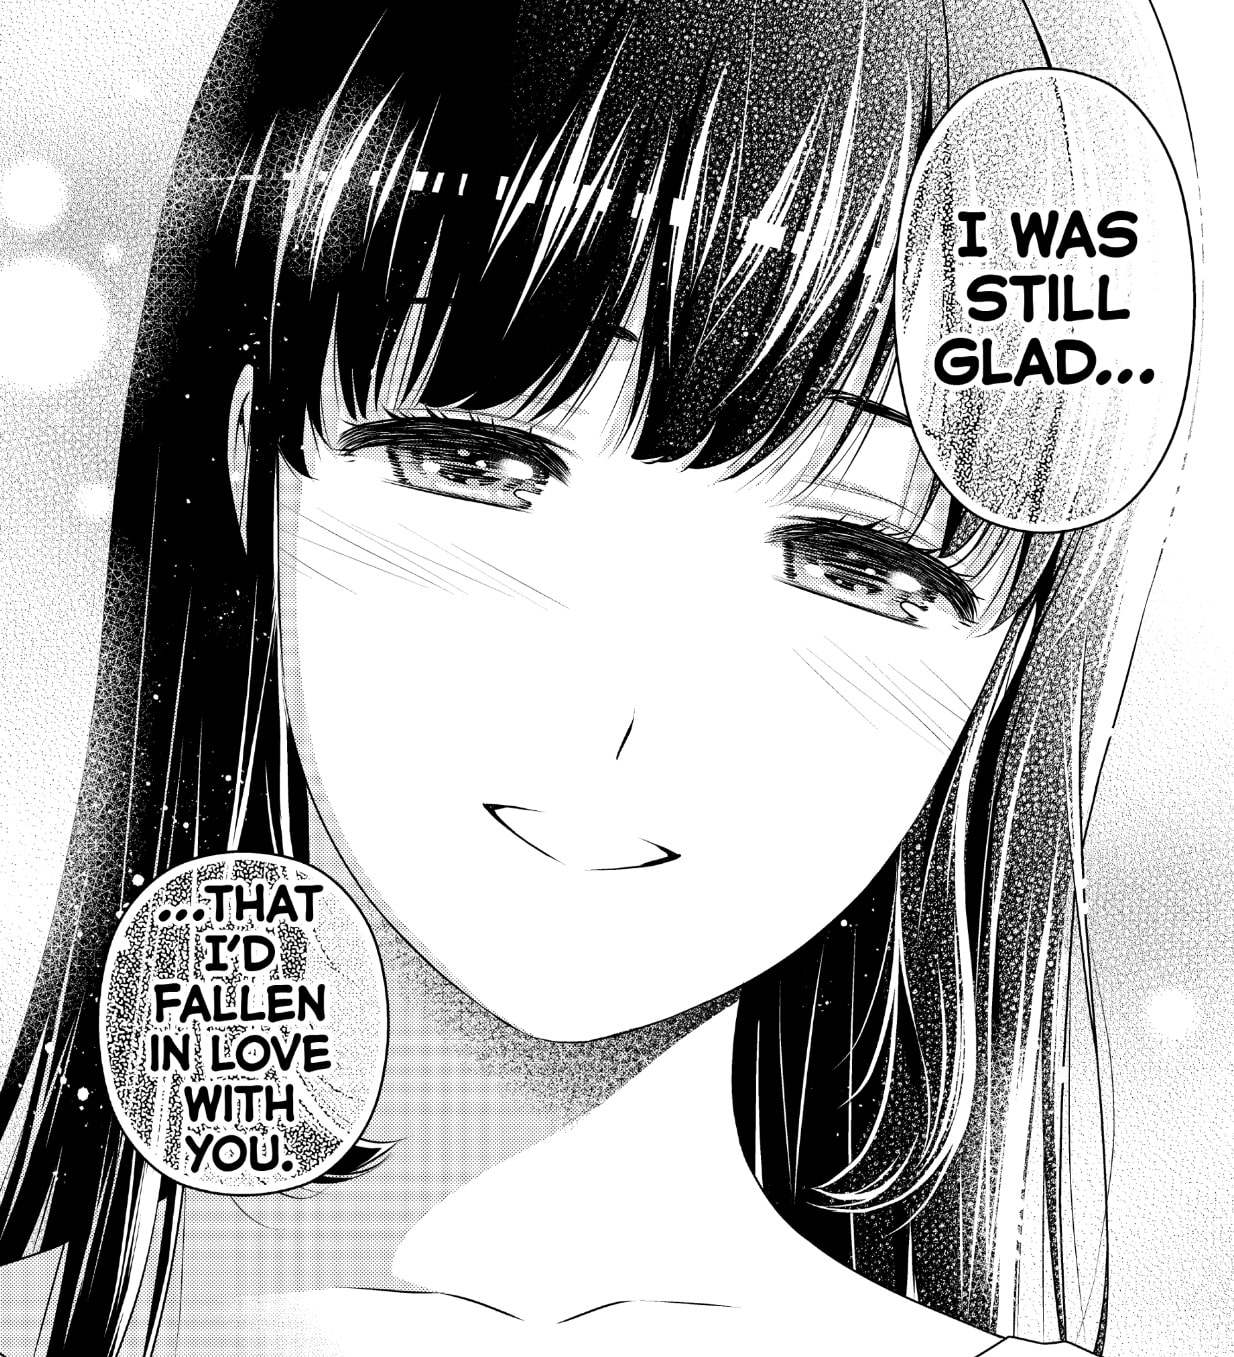 Domestic Girlfriend' chapter 276 (final chapter) review • AIPT